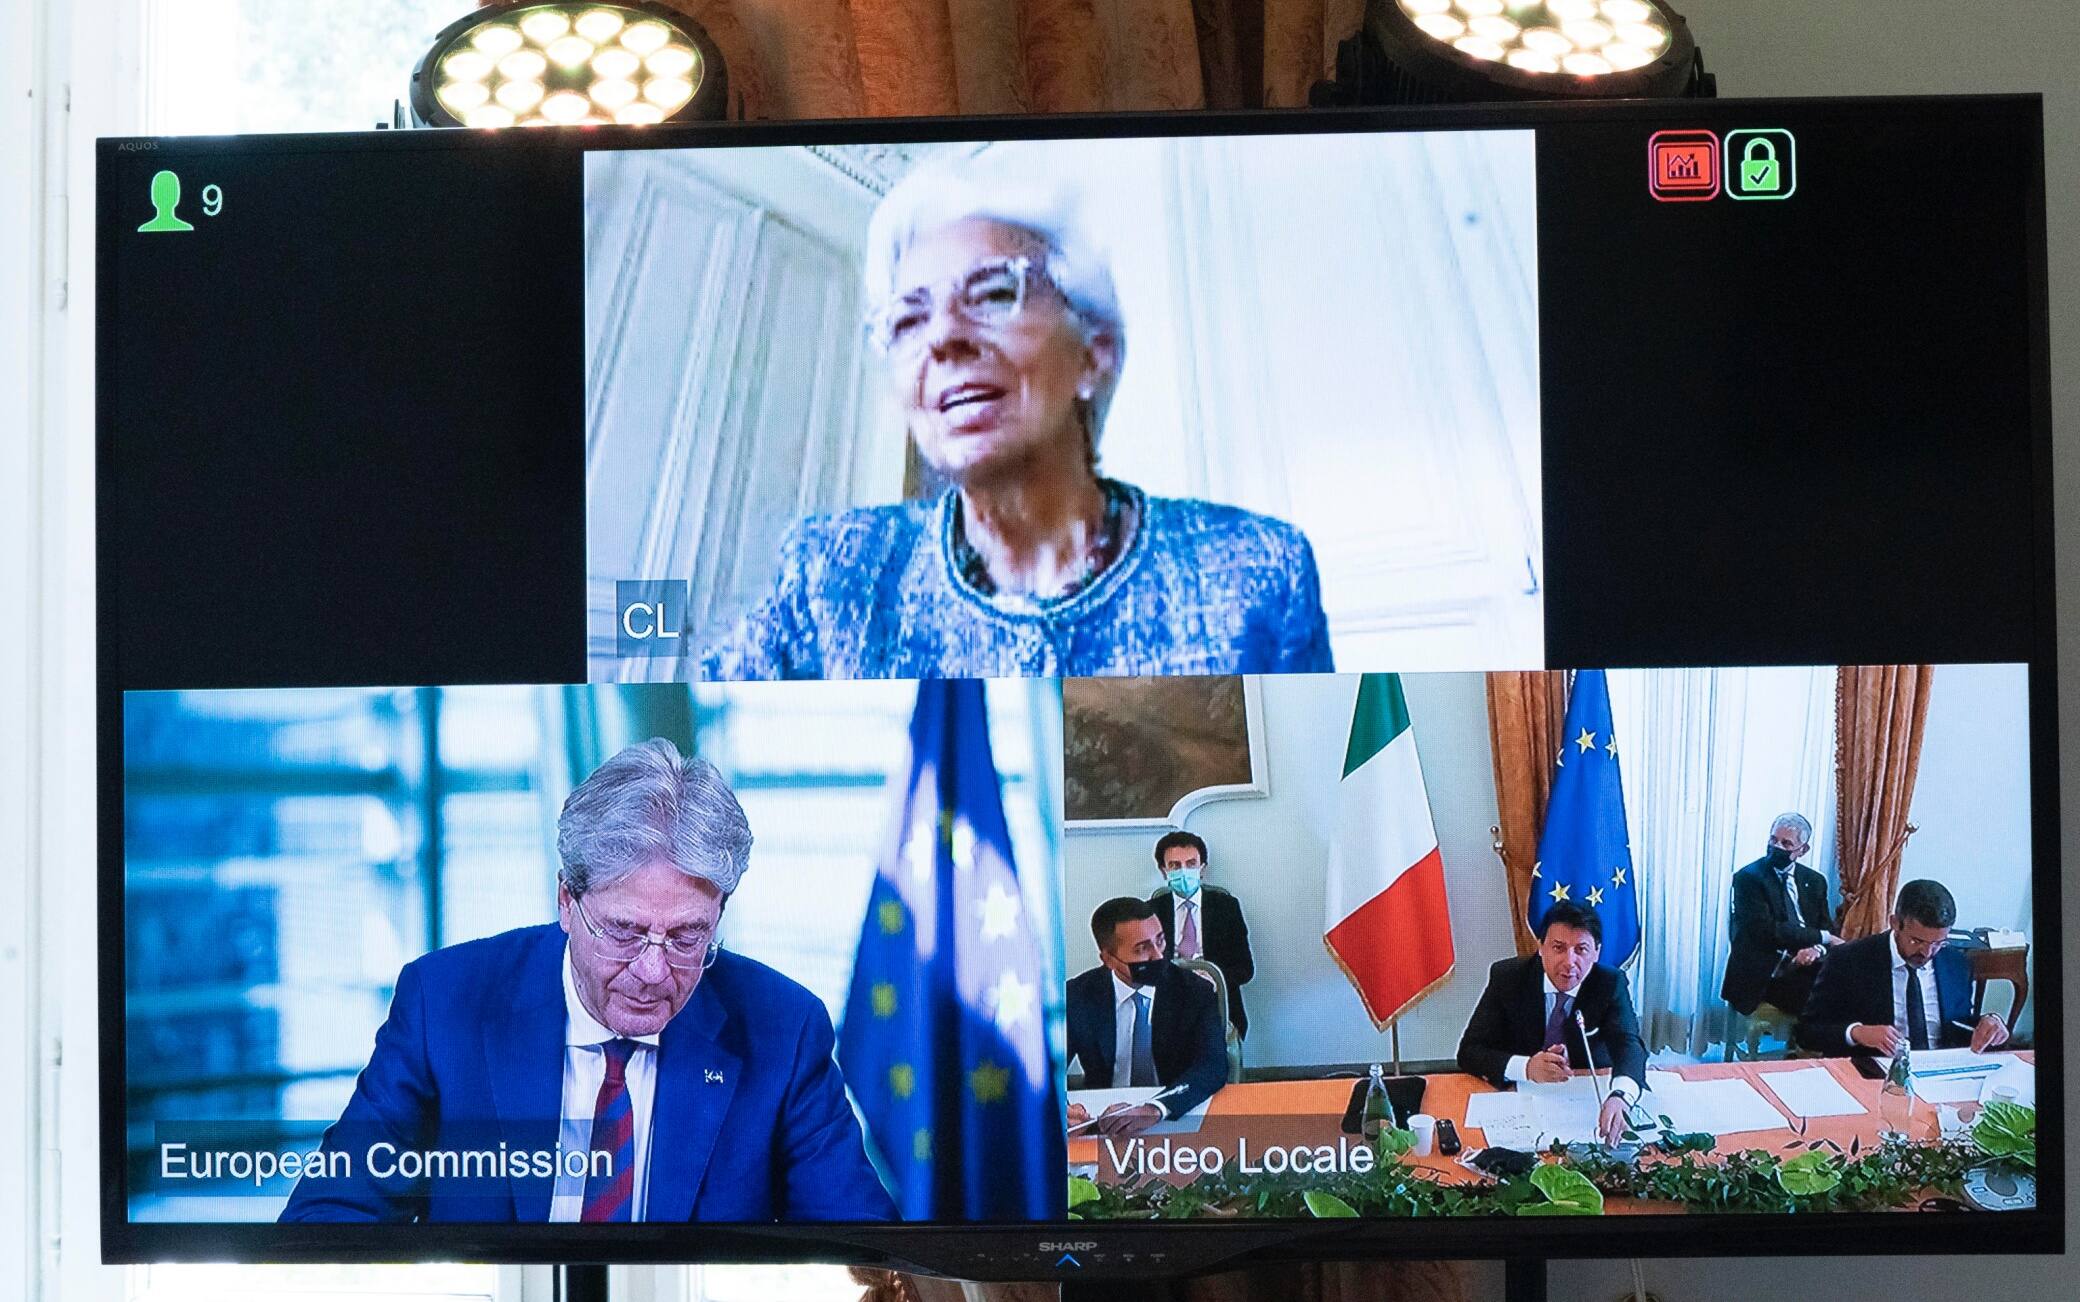 This handout picture, released by Chigi Palace Press office, shows a moment of the illustration of the relaunch plan of Italy by the Italian Prime Minister Giuseppe Conte, at Villa Pamphilj, Rome, Italy, 13 June 2020. "Modernisation of the Country. Ecological transition. Social, territorial and gender inclusion". These are the three "strategic lines" that Conte underlined. "We are working to have a more efficient, digitized Public Administration. We must ensure that existing digital technologies for everyday life can increase the productivity of the economy and innovation," he adds. ANSA / Filippo Attili - Chigi Palace Press office +++ ANSA PROVIDES ACCESS TO THIS HANDOUT PHOTO TO BE USED SOLELY TO ILLUSTRATE NEWS REPORTING OR COMMENTARY ON THE FACTS OR EVENTS DEPICTED IN THIS IMAGE; NO ARCHIVING; NO LICENSING +++